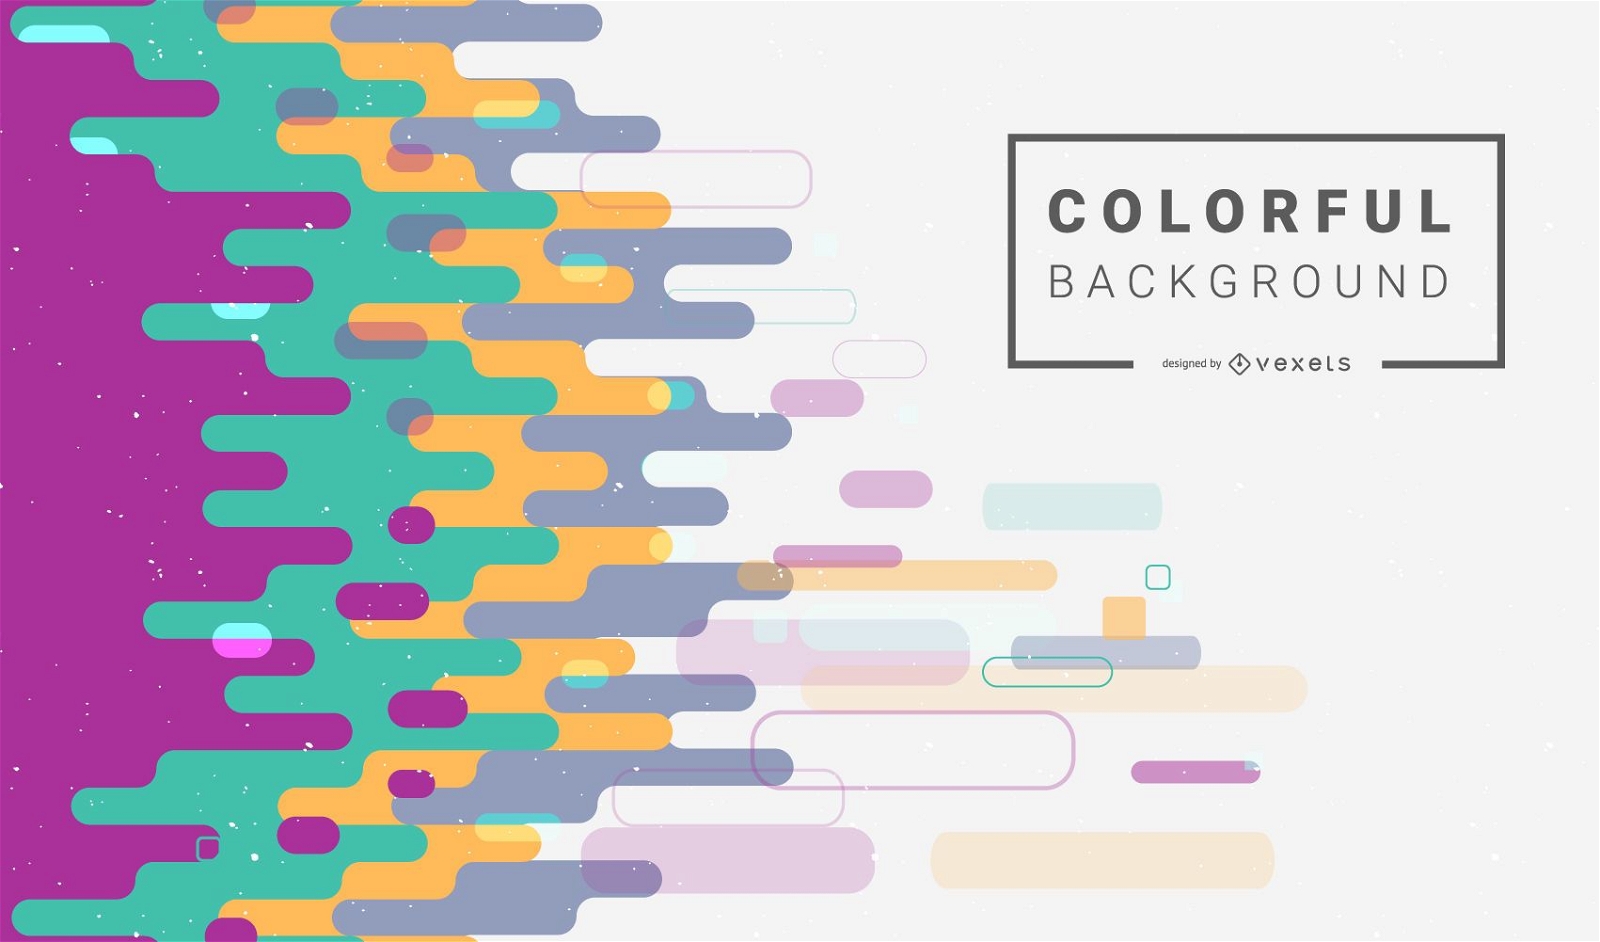 Colorful free vector background